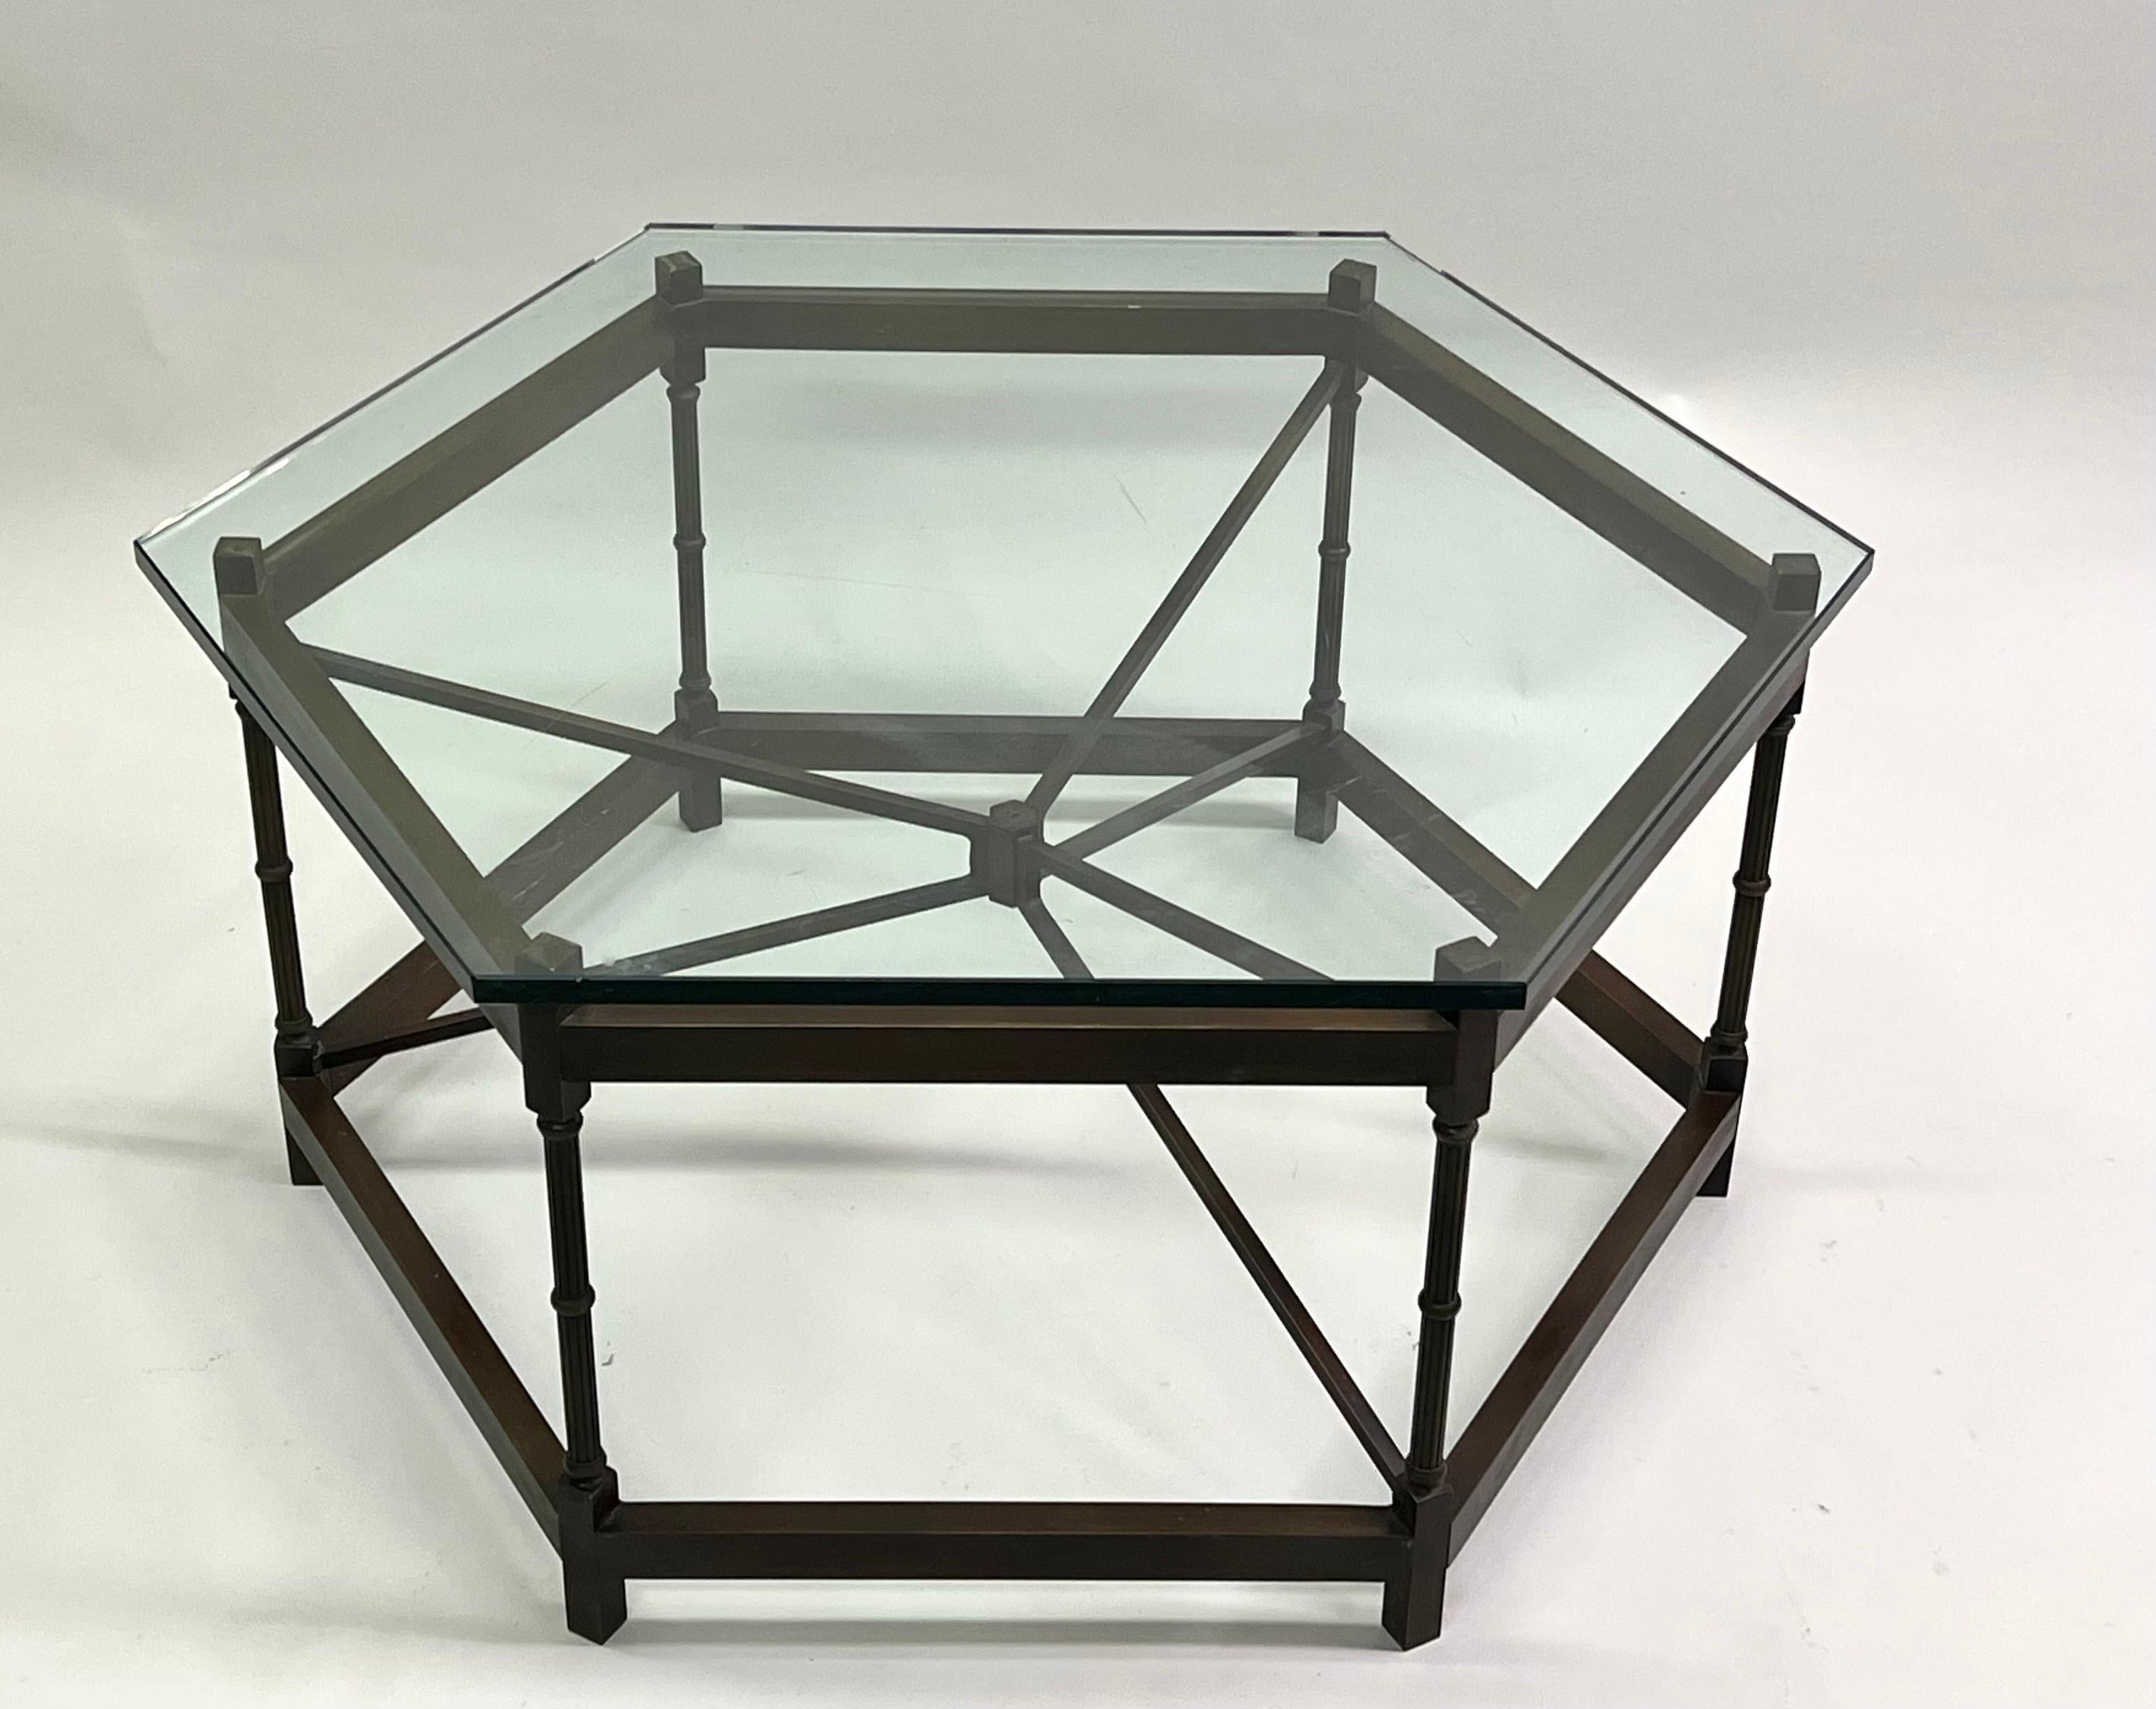 20th Century French Modern Neoclassical Hexagonal Bronze Cocktail Table, Poillerat & Arbus For Sale